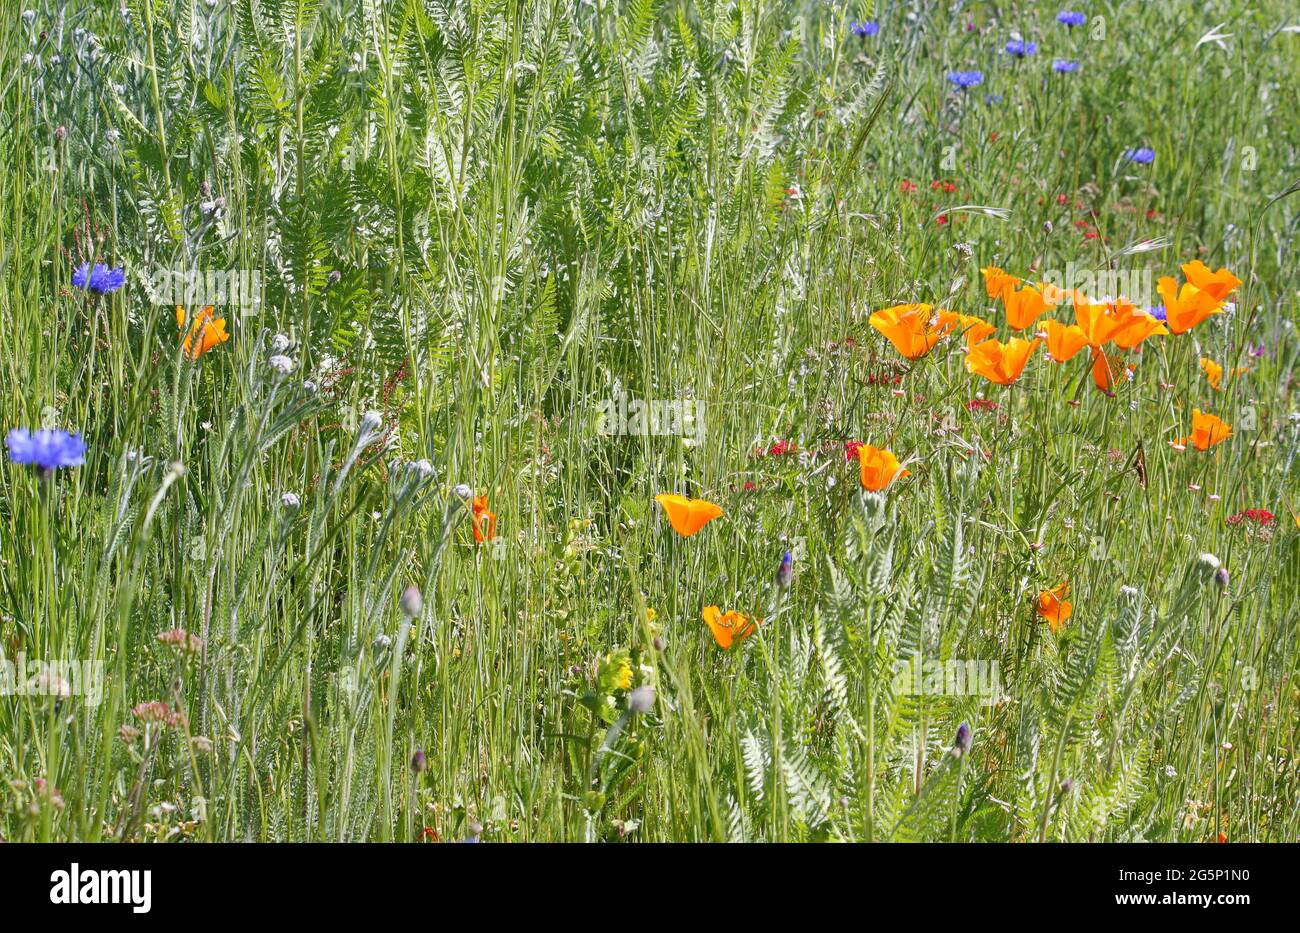 Section of a wildflower meadow, attractive to bees and butterflies, featuring yellow California poppies and blue cornflowers Stock Photo